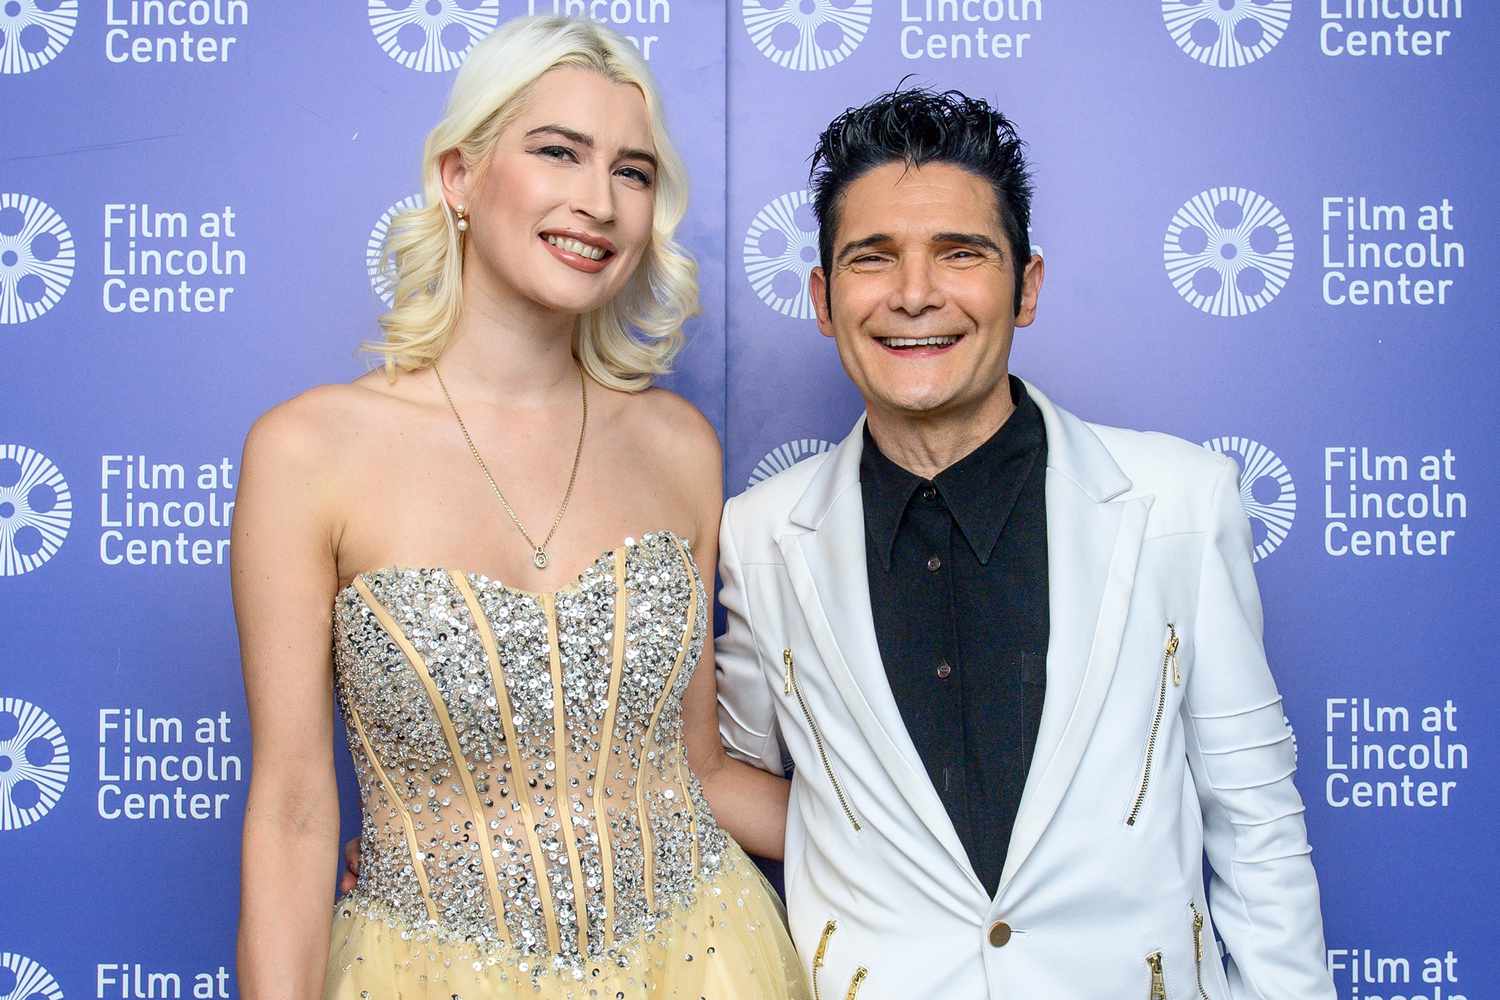 Corey Feldman and Courtney Anne Mitchell separating after 7 years of marriage